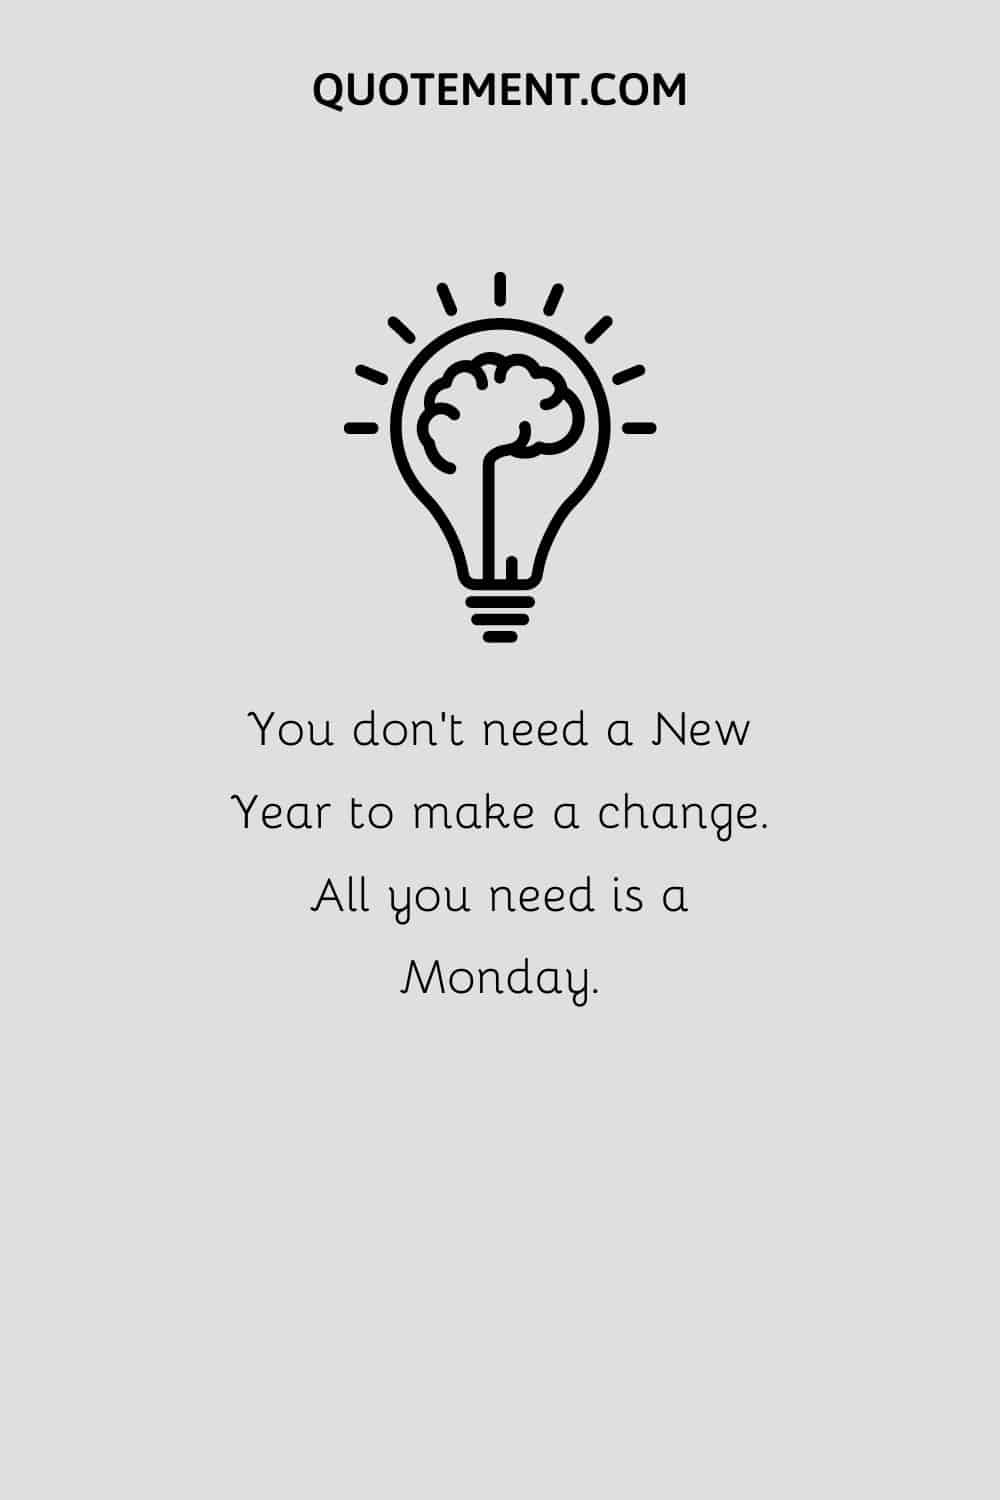 bulb illustration representing Monday inspiring quote to start the week